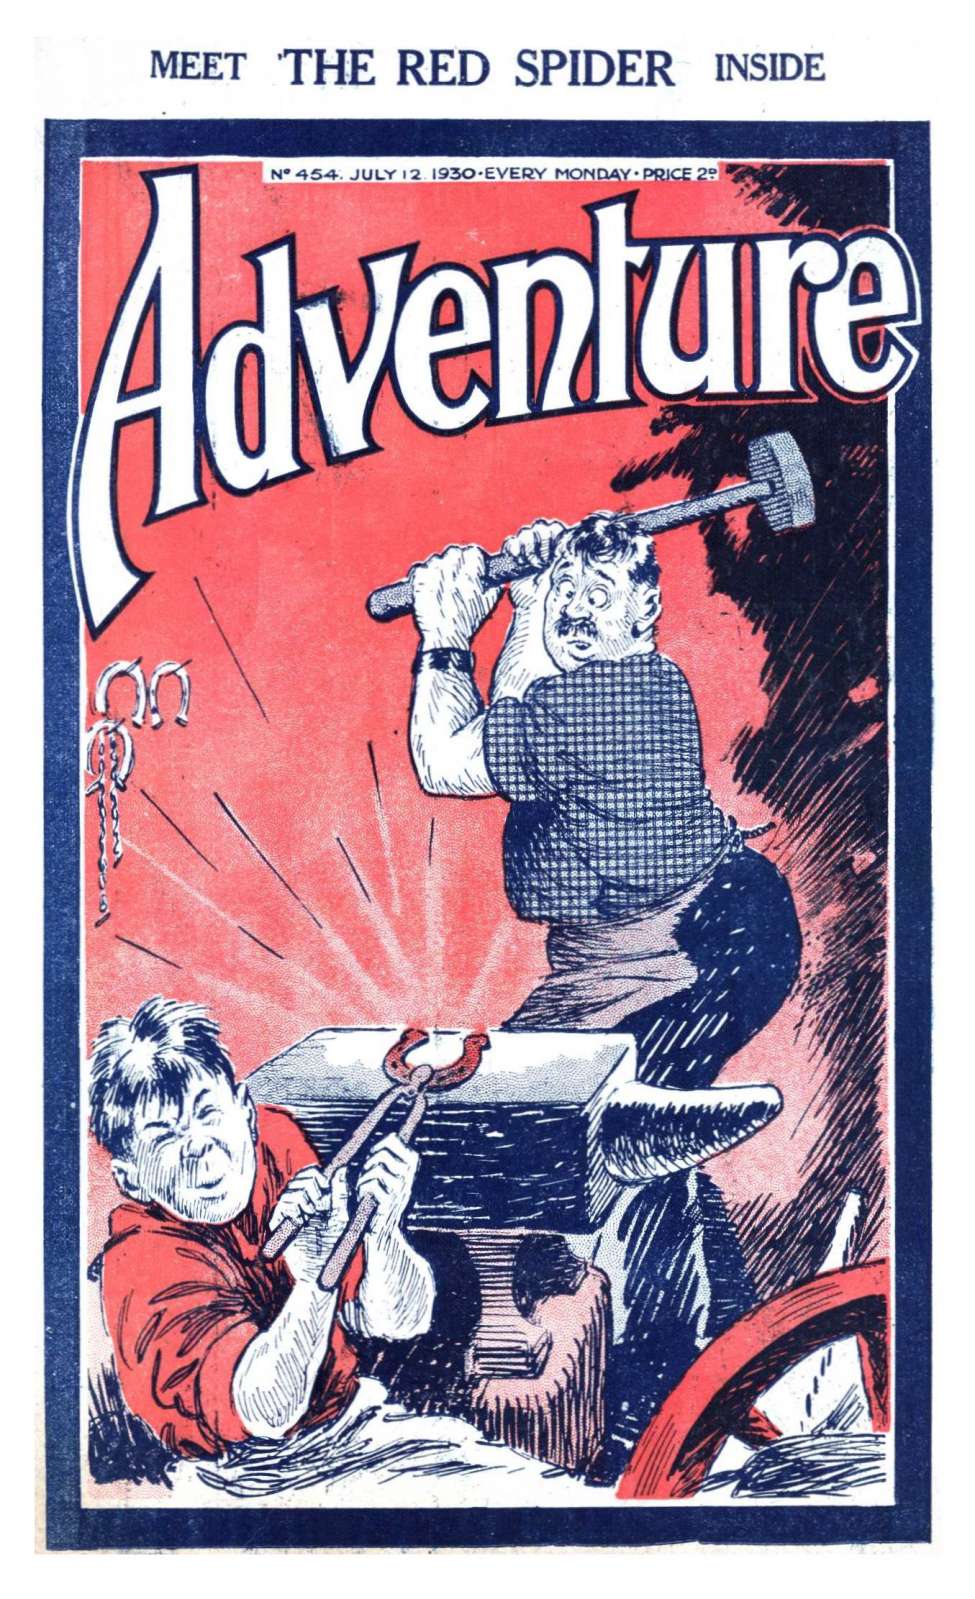 Comic Book Cover For Adventure 454 - The Red Spider